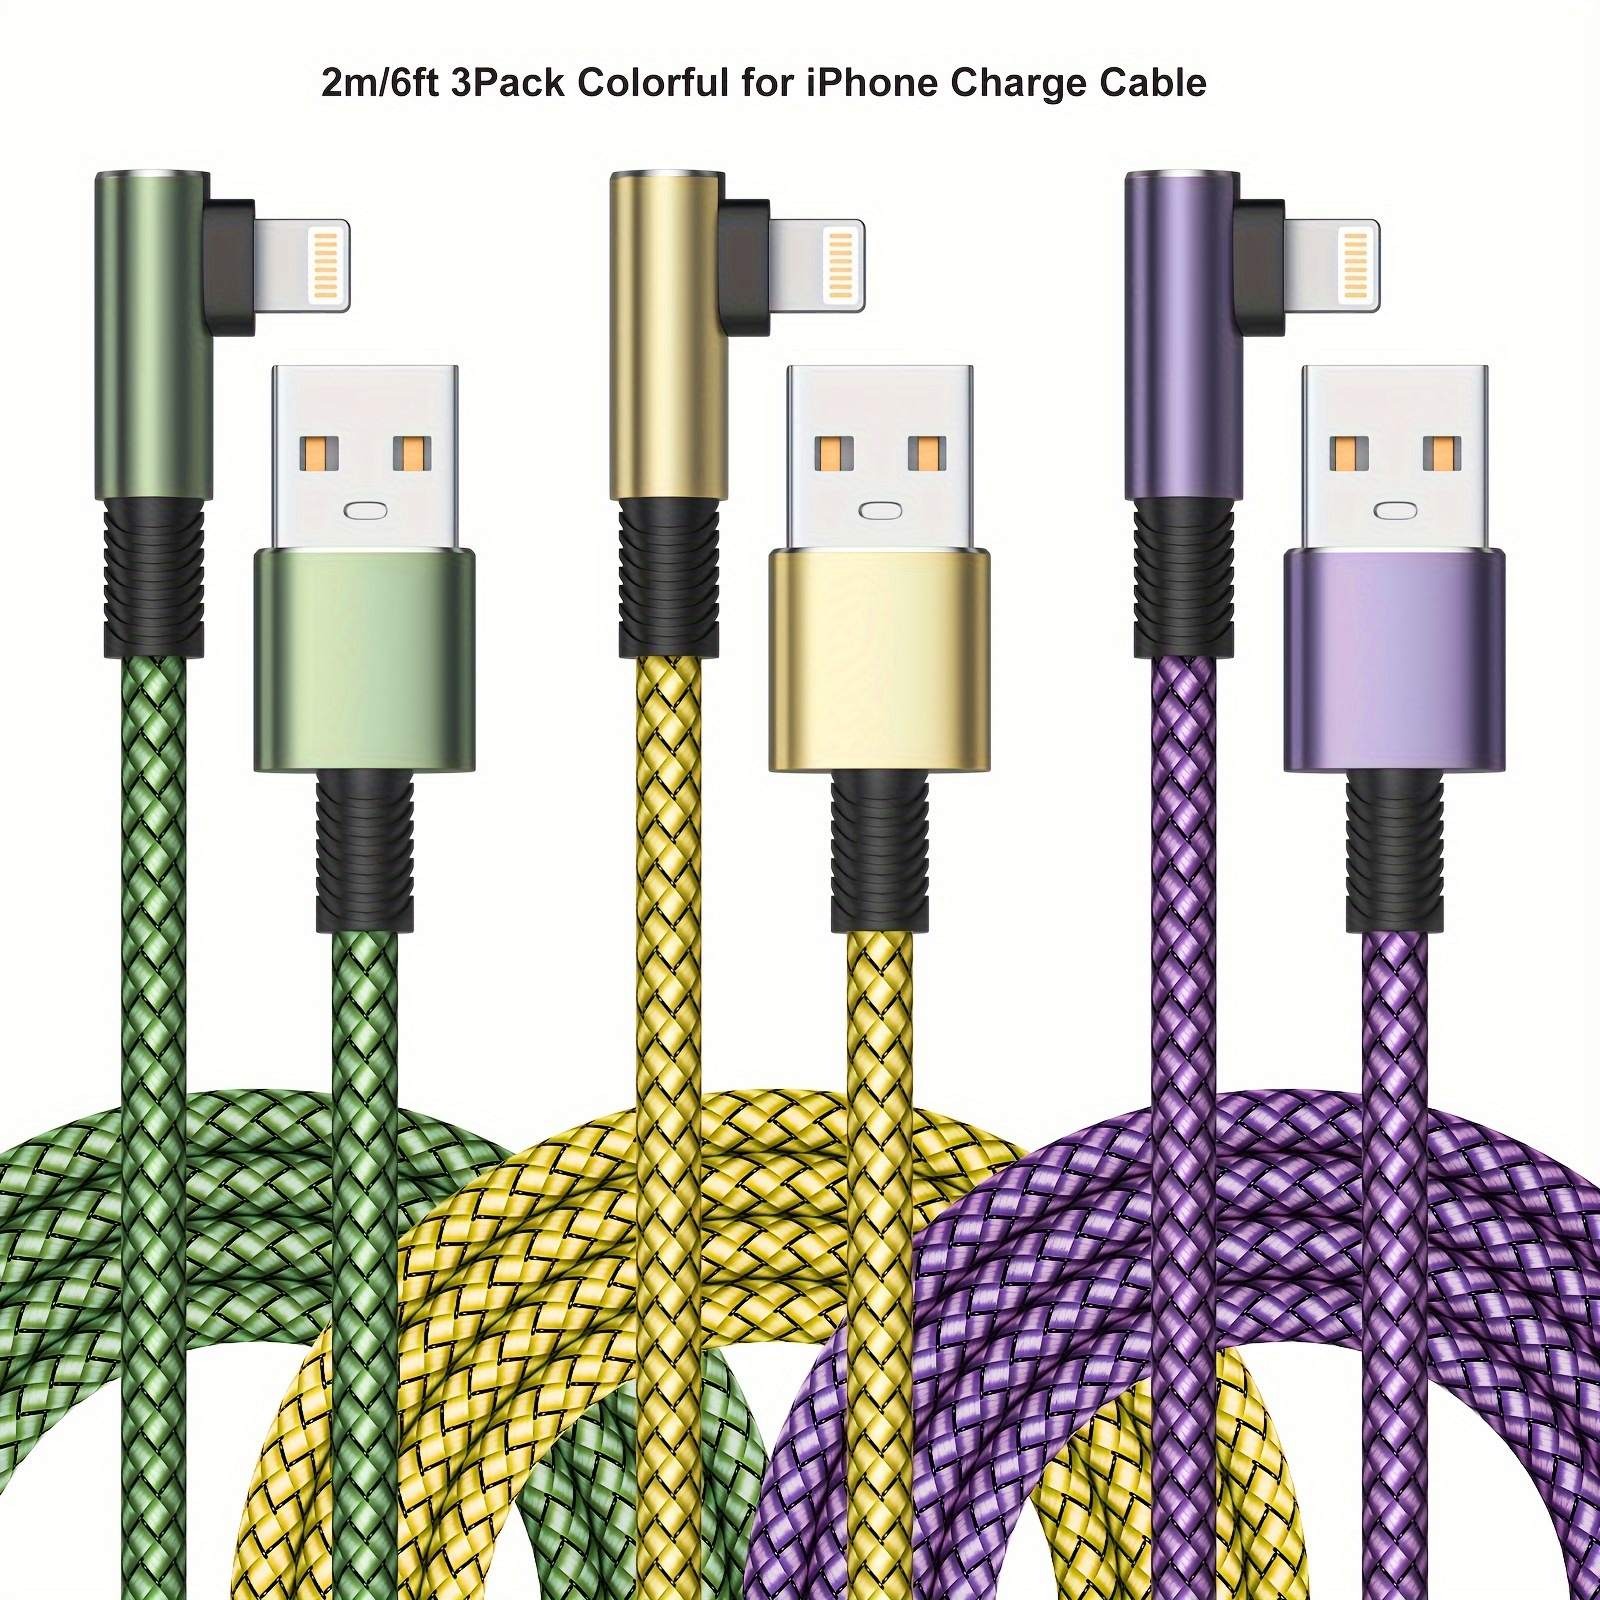 

3 Packs 2m/6ft For Charger Fast Charging For Compatible With 14 13 12 11 Pro Max Xr Xs X 8 7 6 Plus Se And More - Colorful